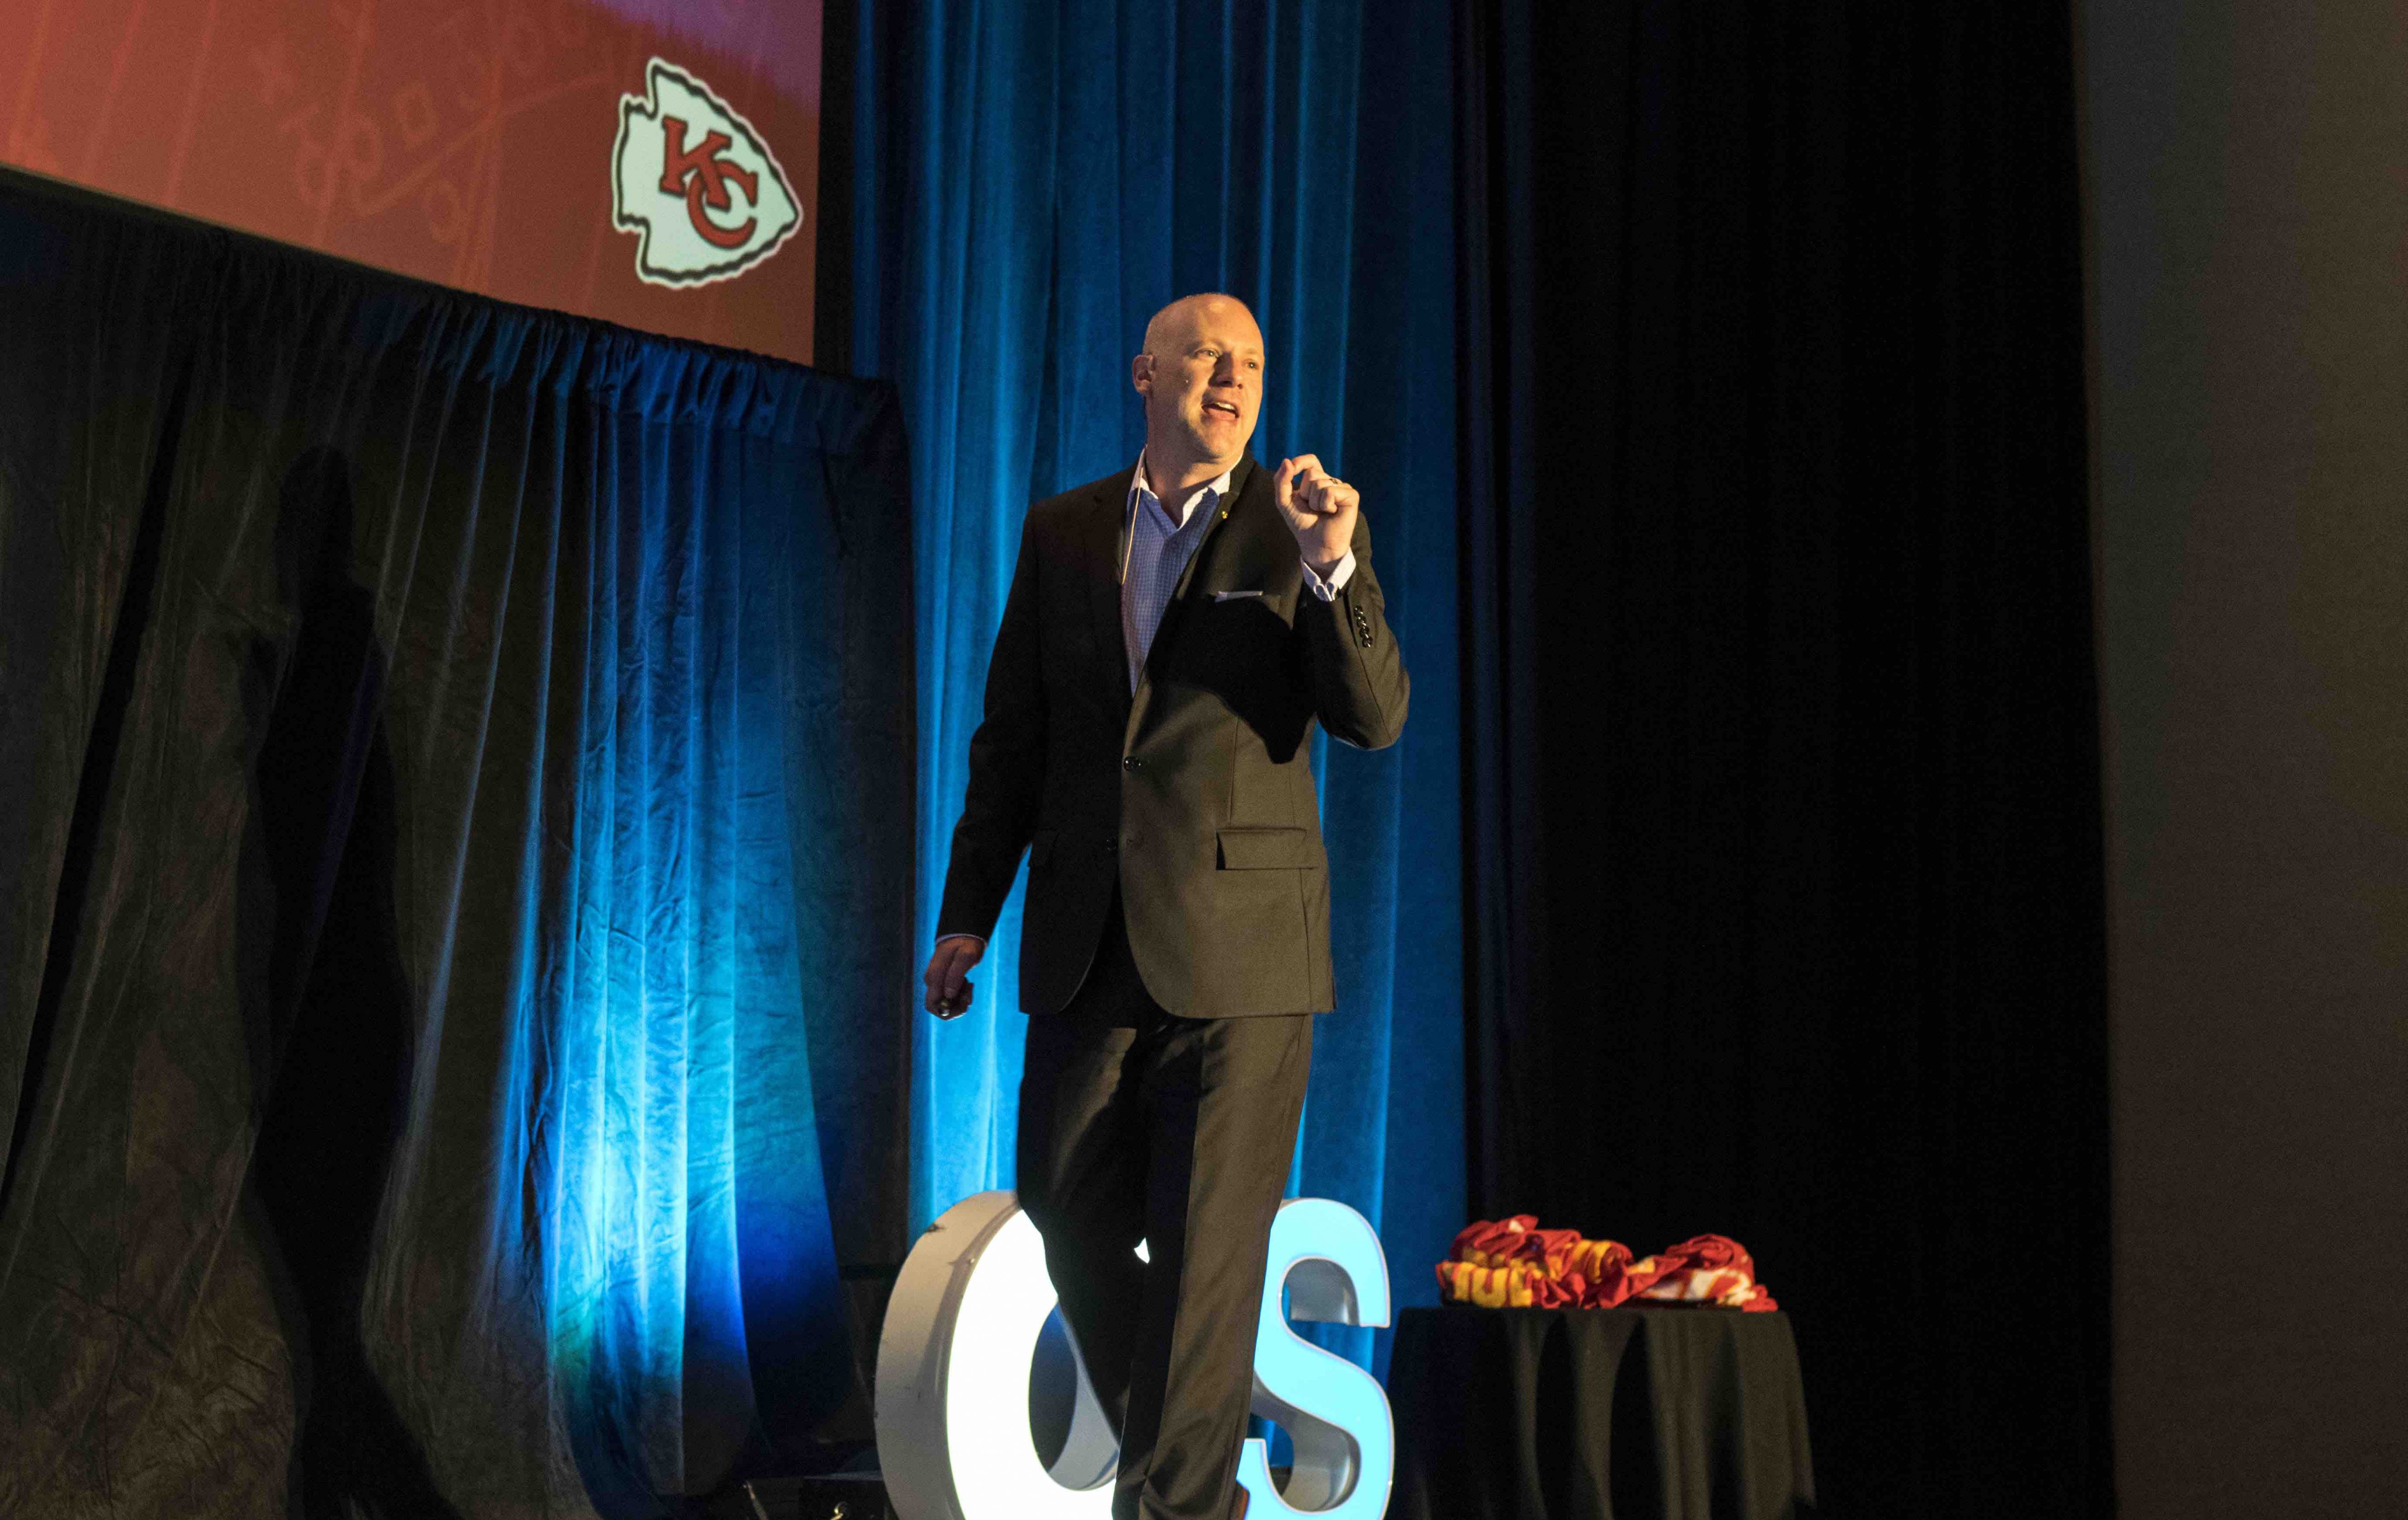 How the Kansas City Chiefs became the No. 1 NFL team in social engagement